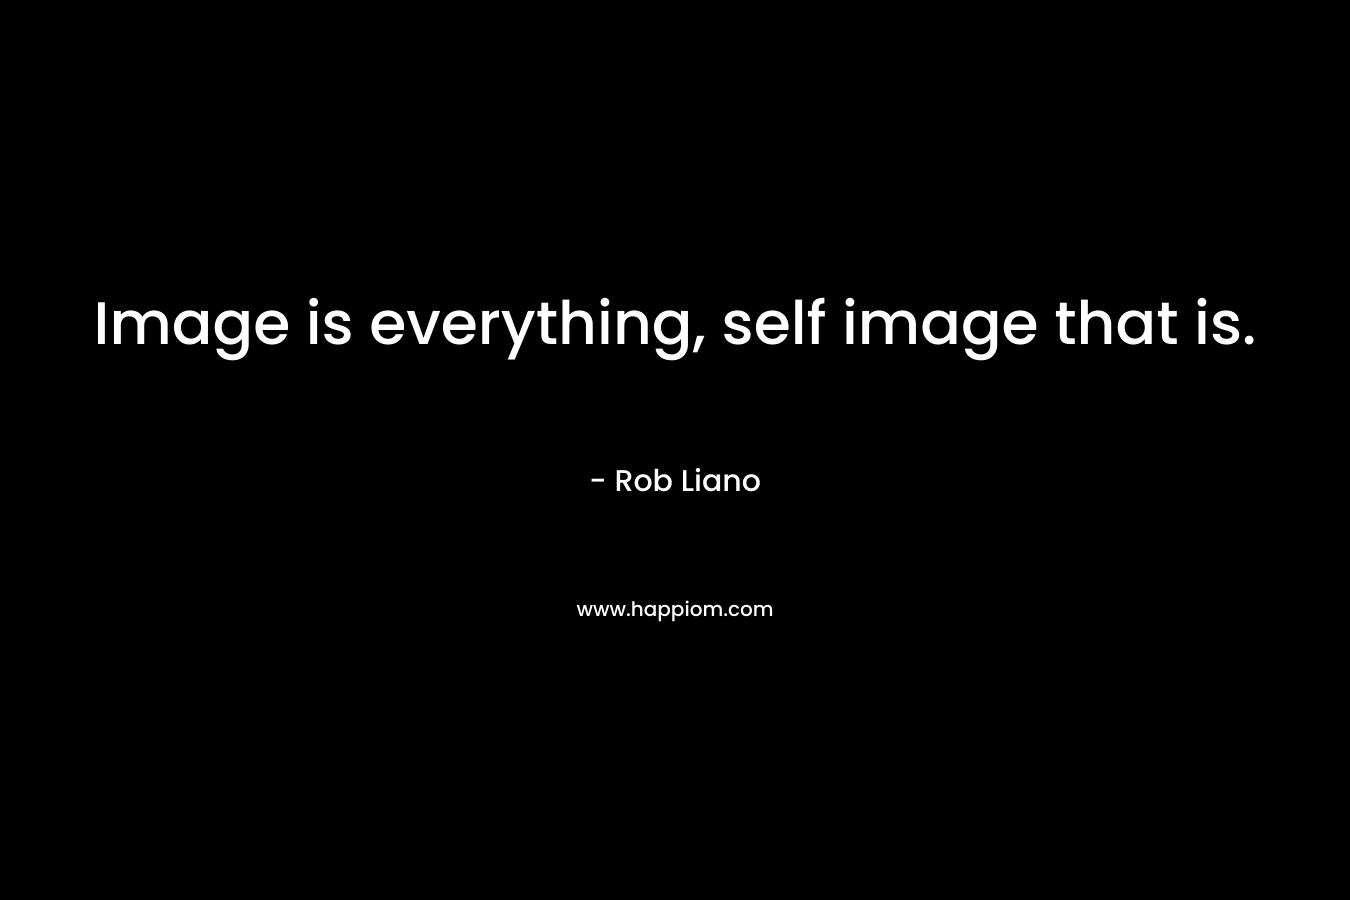 Image is everything, self image that is.